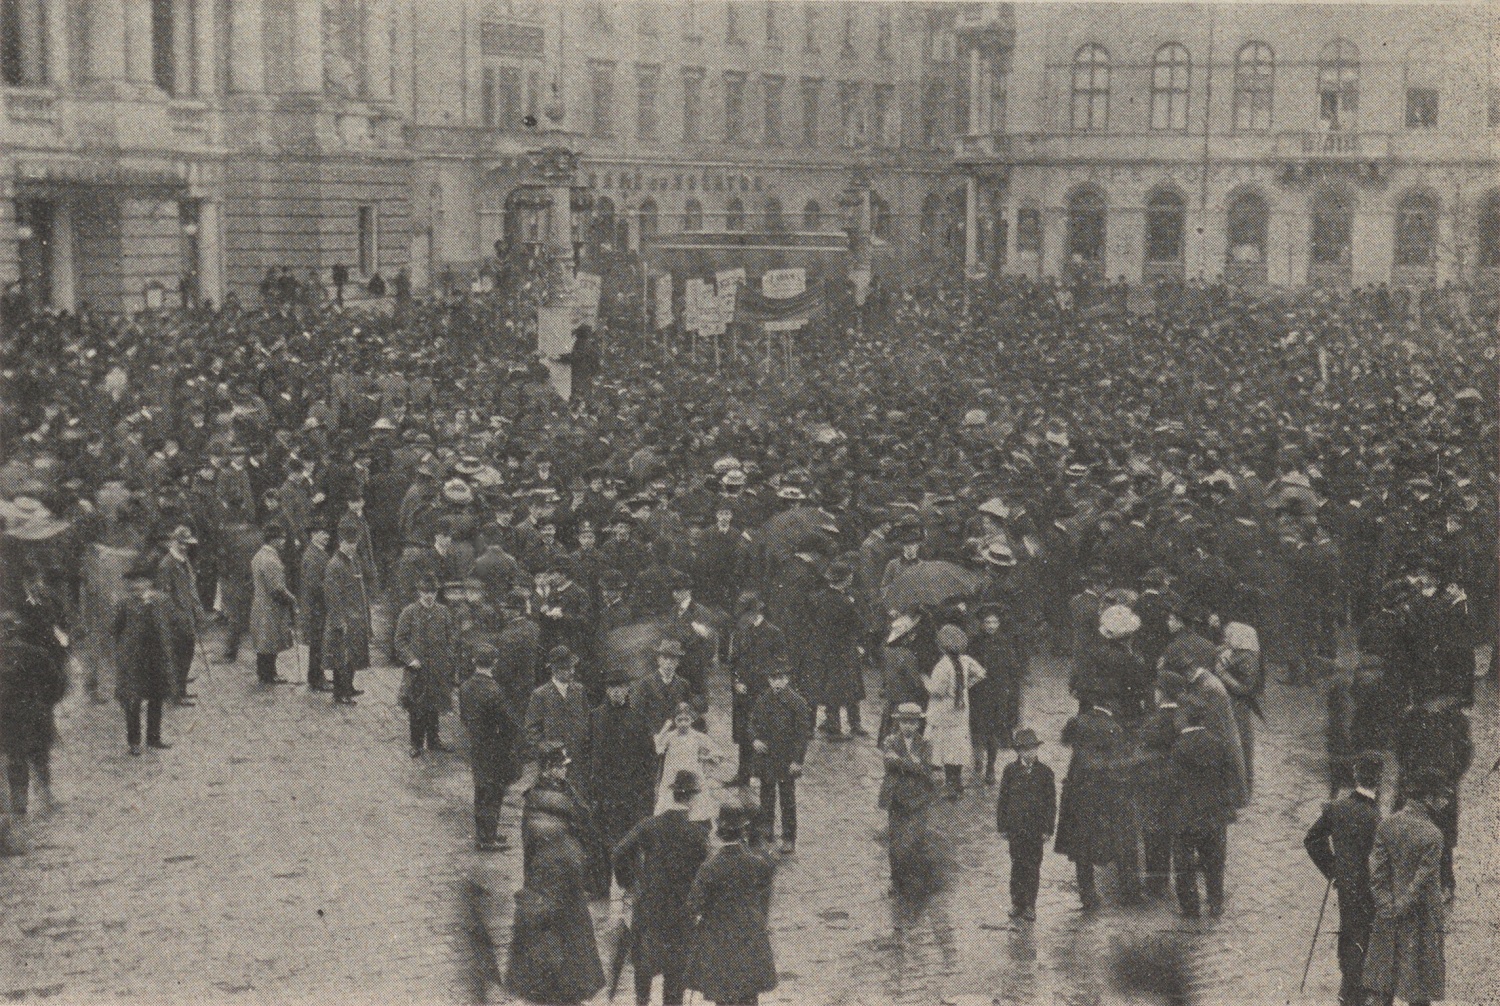 Workers' meeting near the City Theatre in 1909